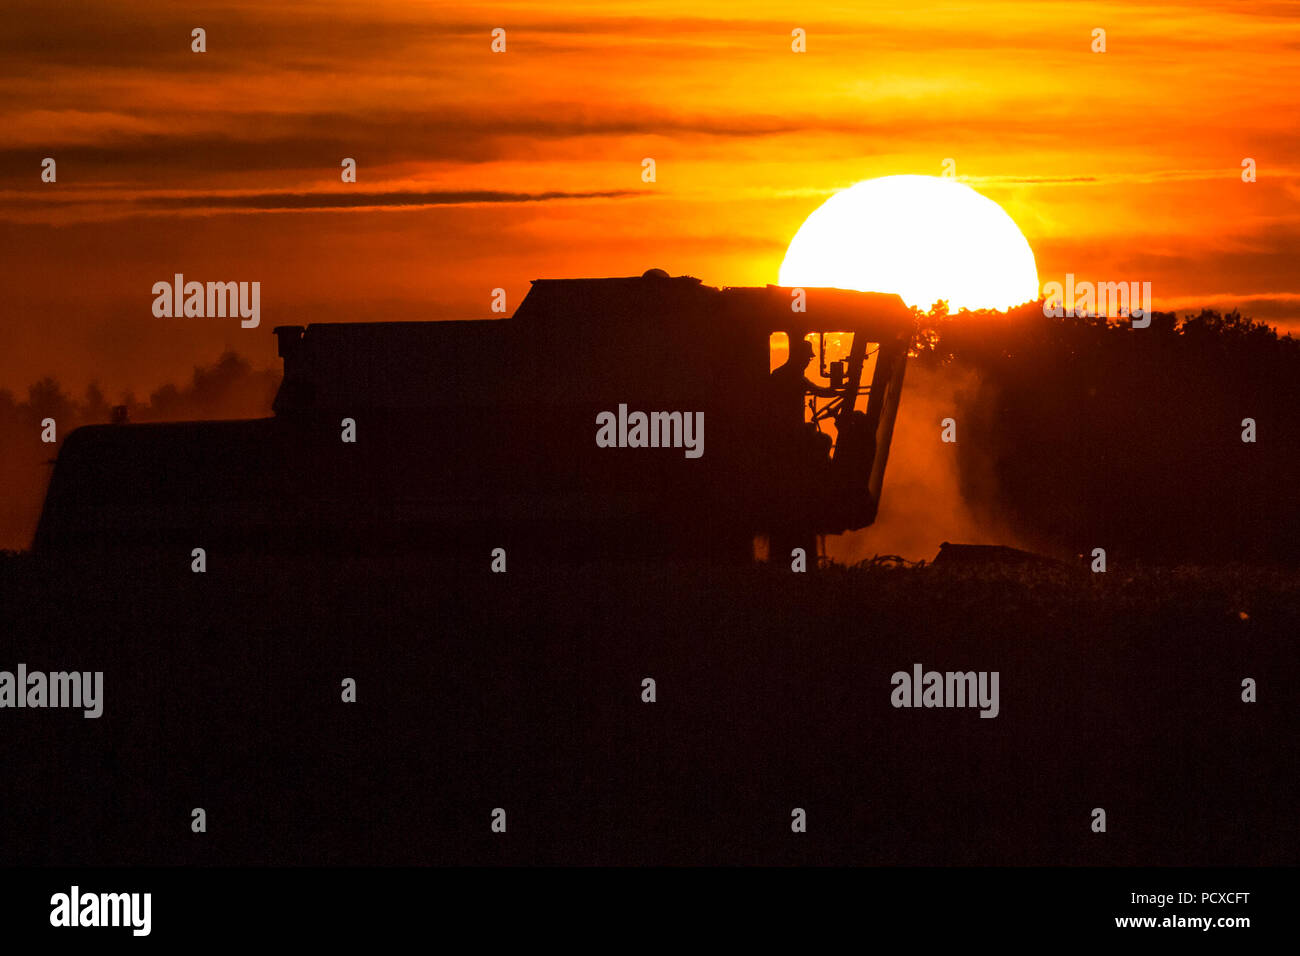 Staffordshire, UK. 4 August 2018.  A combine harvester working a field during a stunning red sunset near Abbots Bromley, Staffordshire, UK, on the evening of the 4th August 2018. Photograph by Richard Holmes. Stock Photo